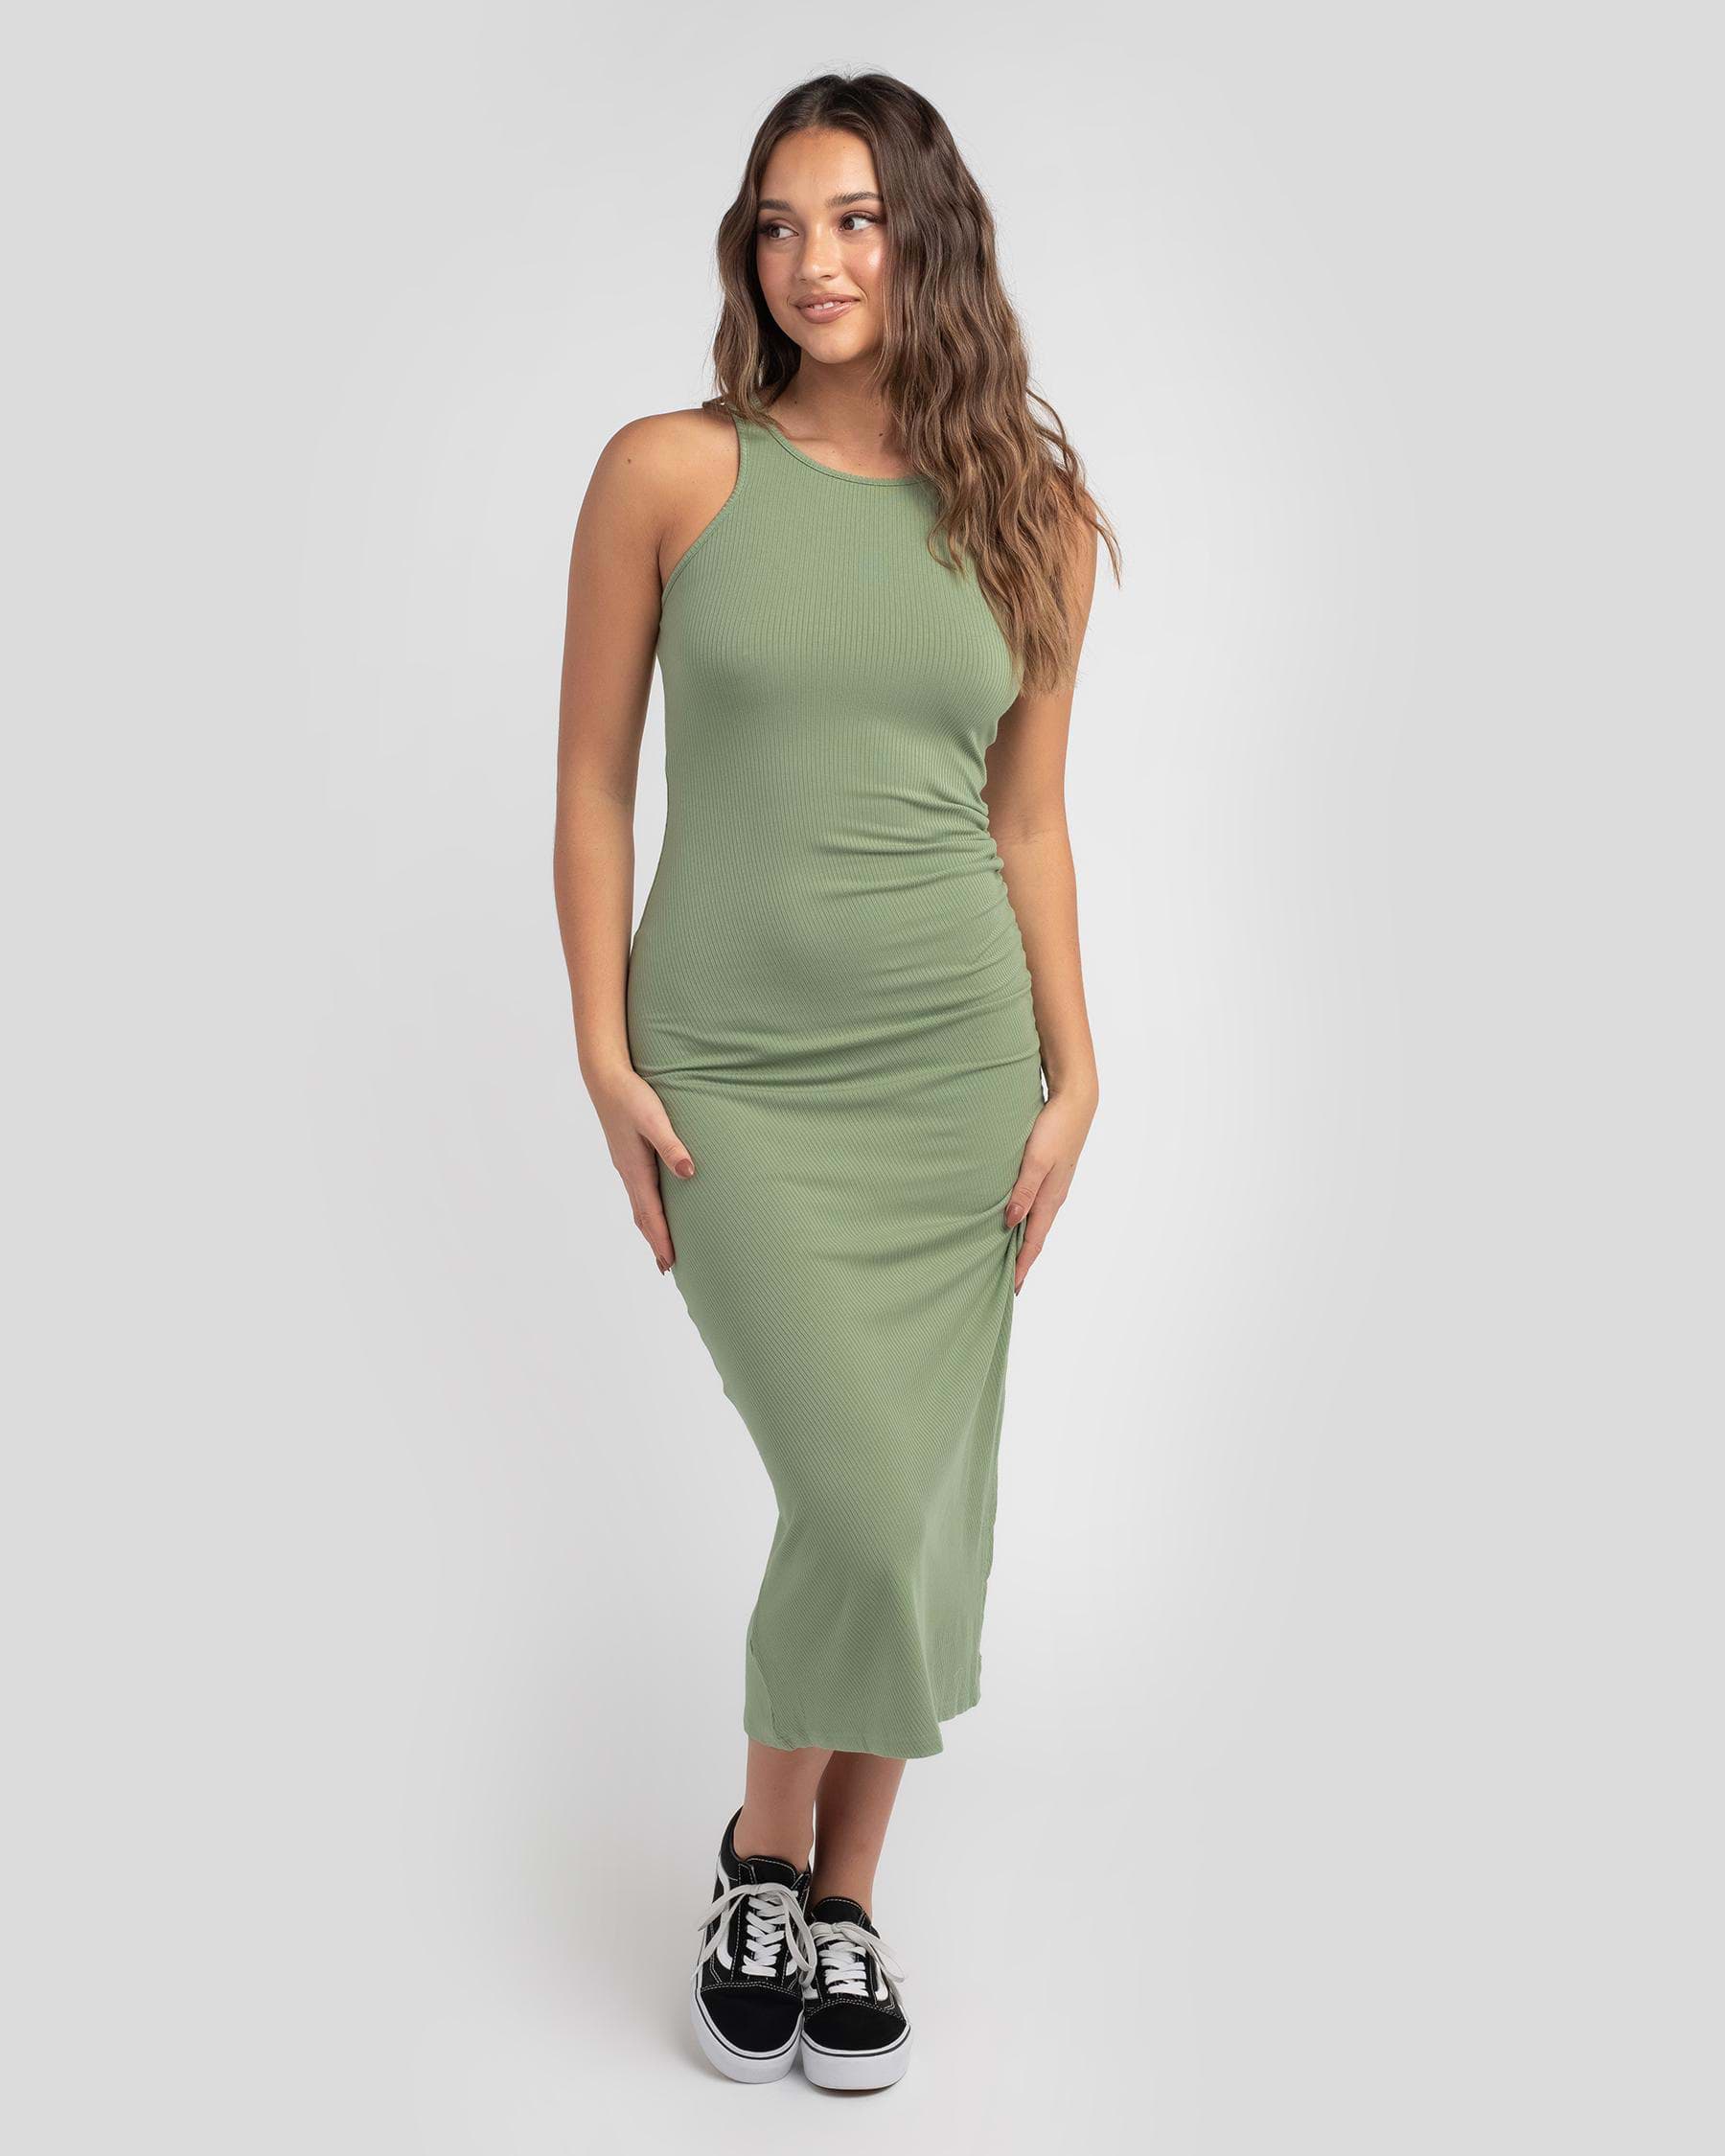 Ava And Ever Ivy Midi Dress In Sage - Fast Shipping & Easy Returns ...